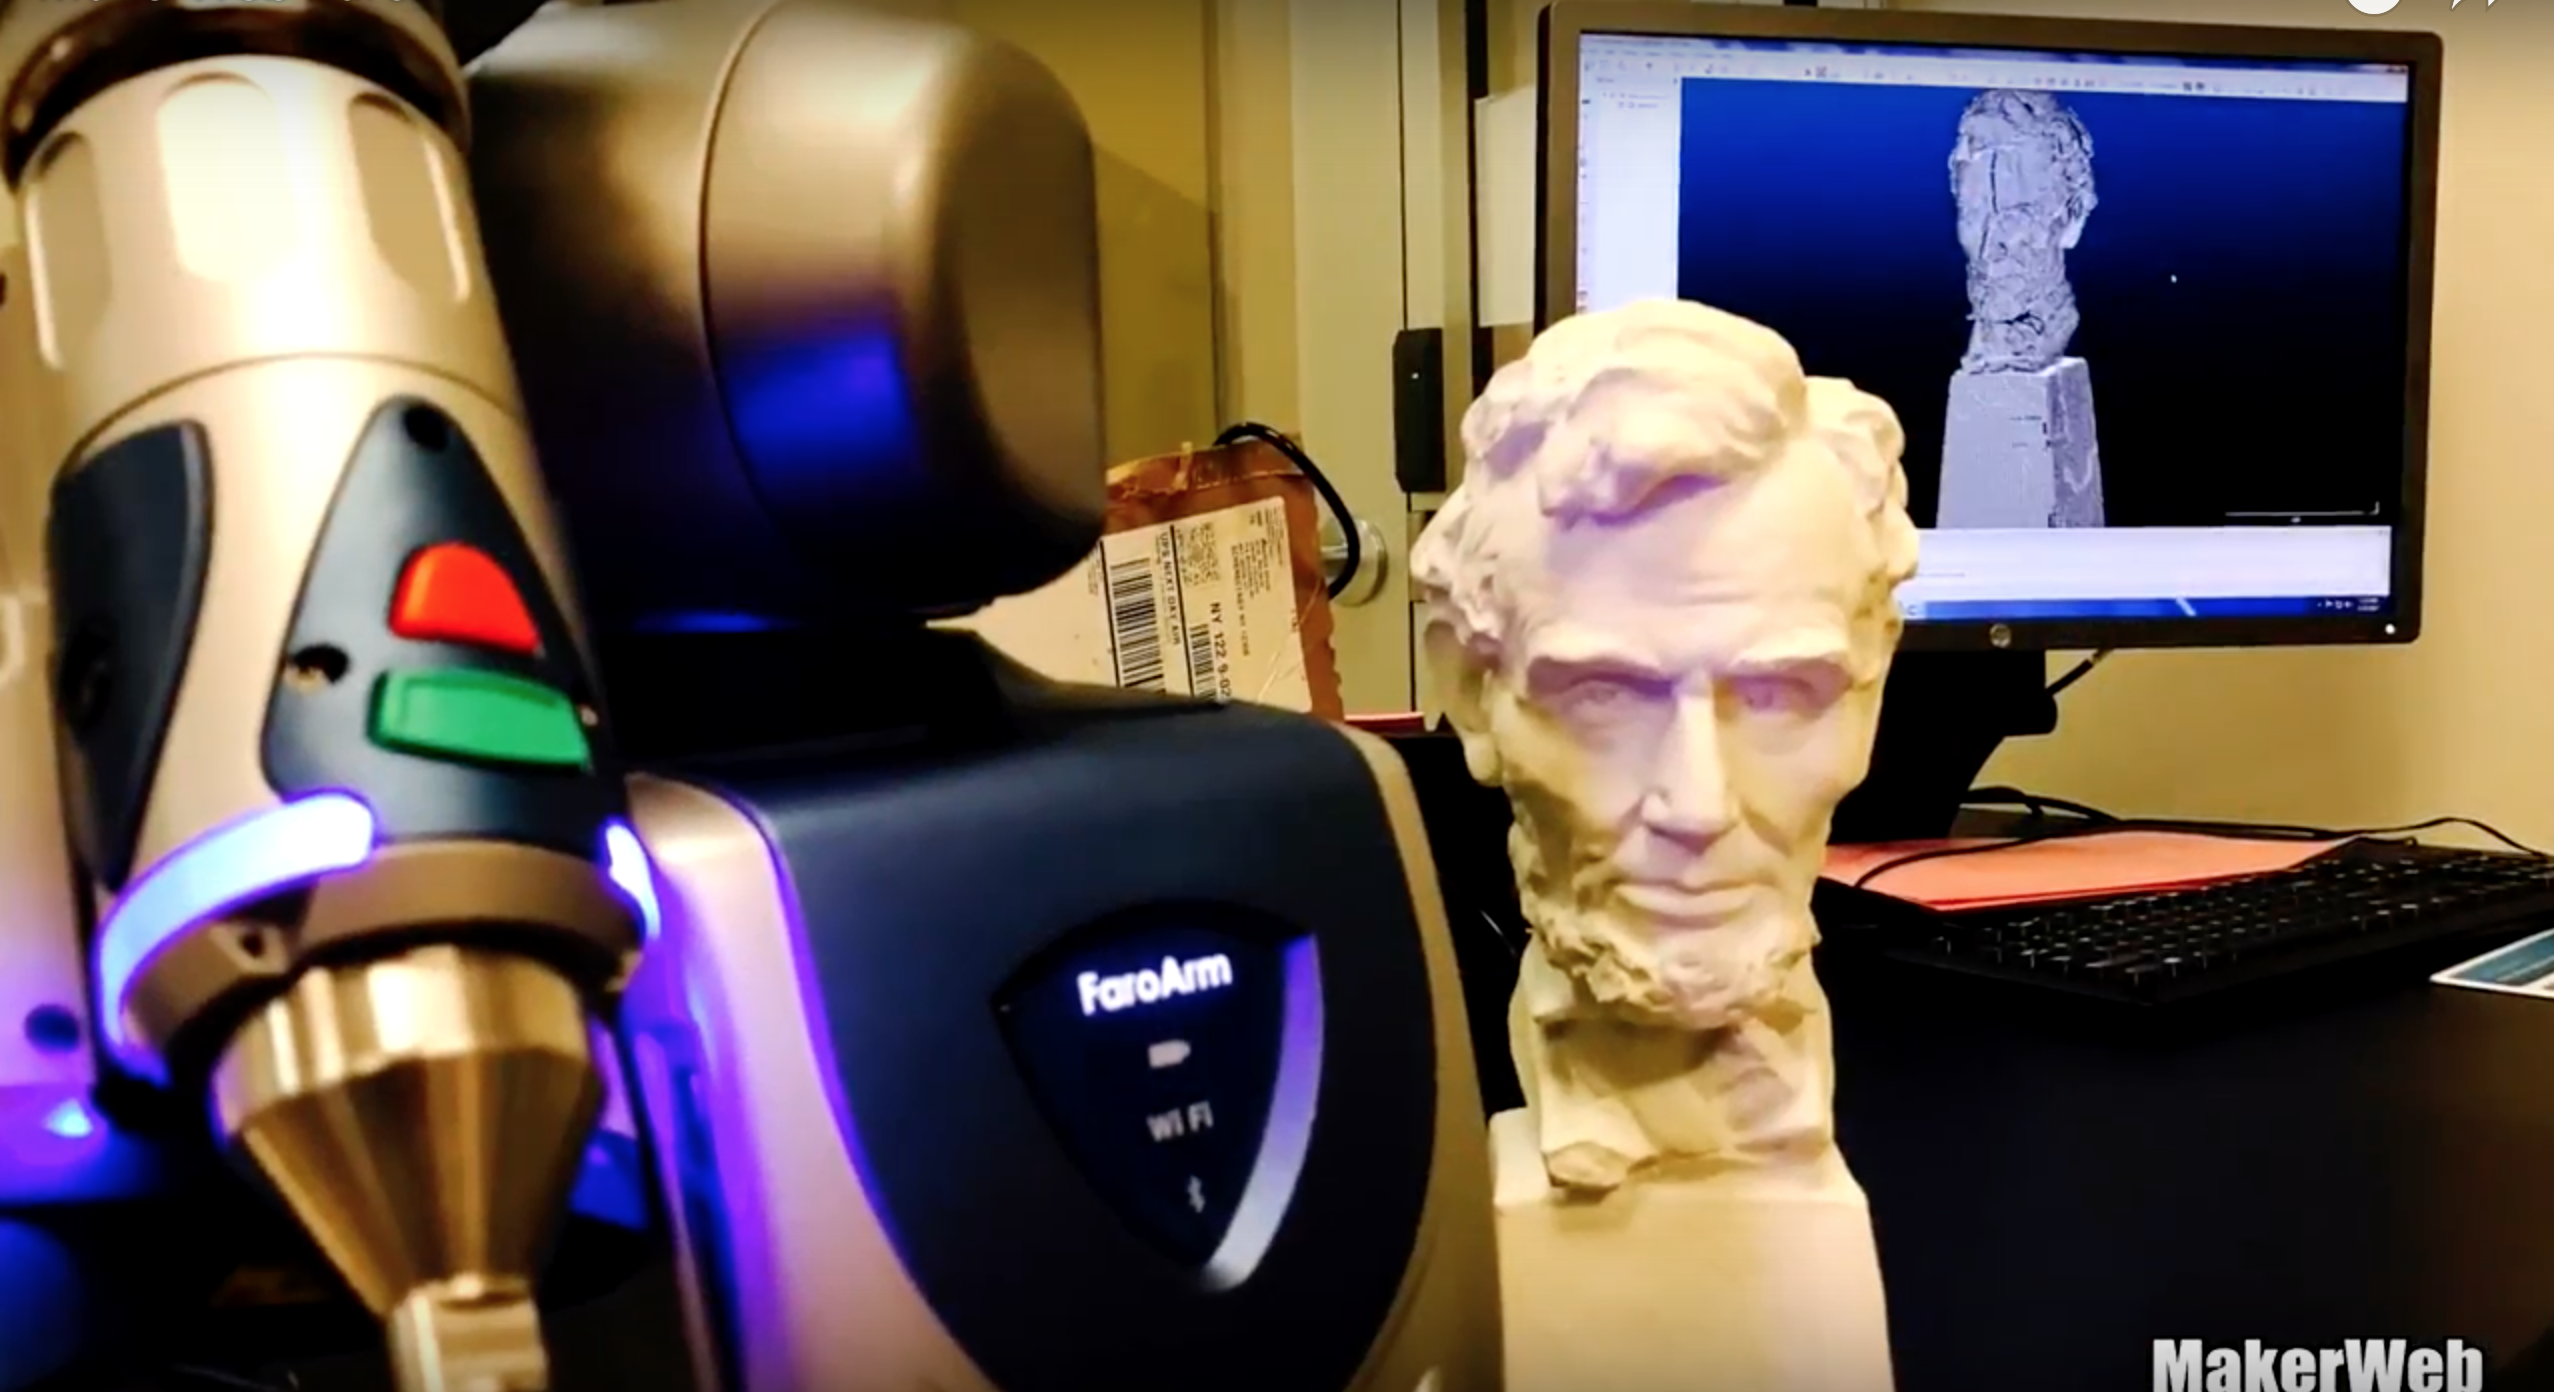 3D Scanning with the FaroArm